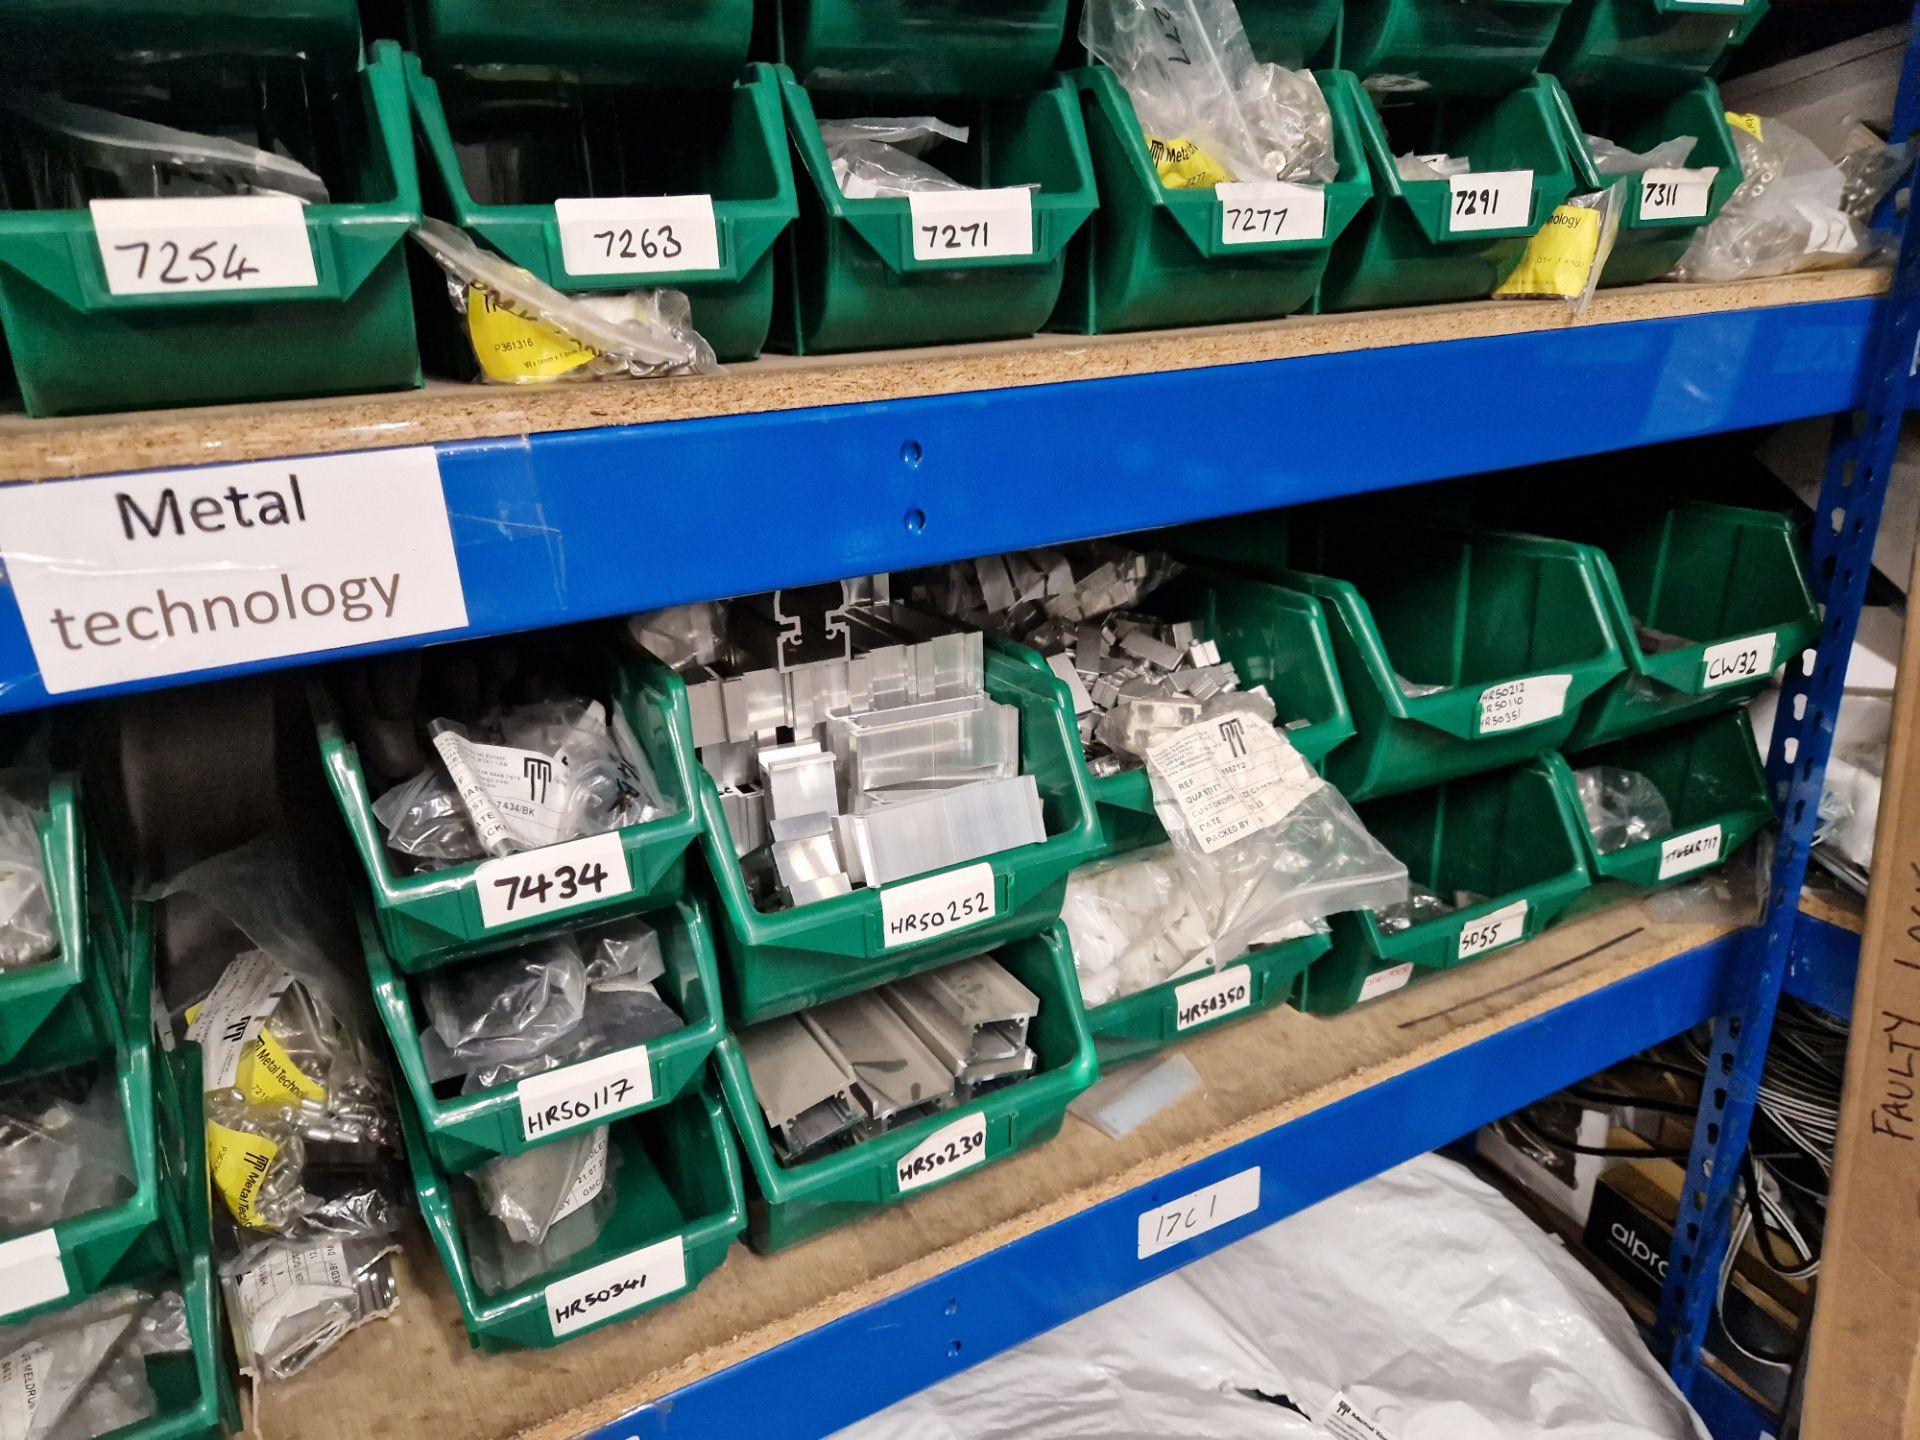 Contents to One Bay of Shelving, including Rubber Gaskets, Aluminium Profile, End Caps, Screws, - Bild 6 aus 6